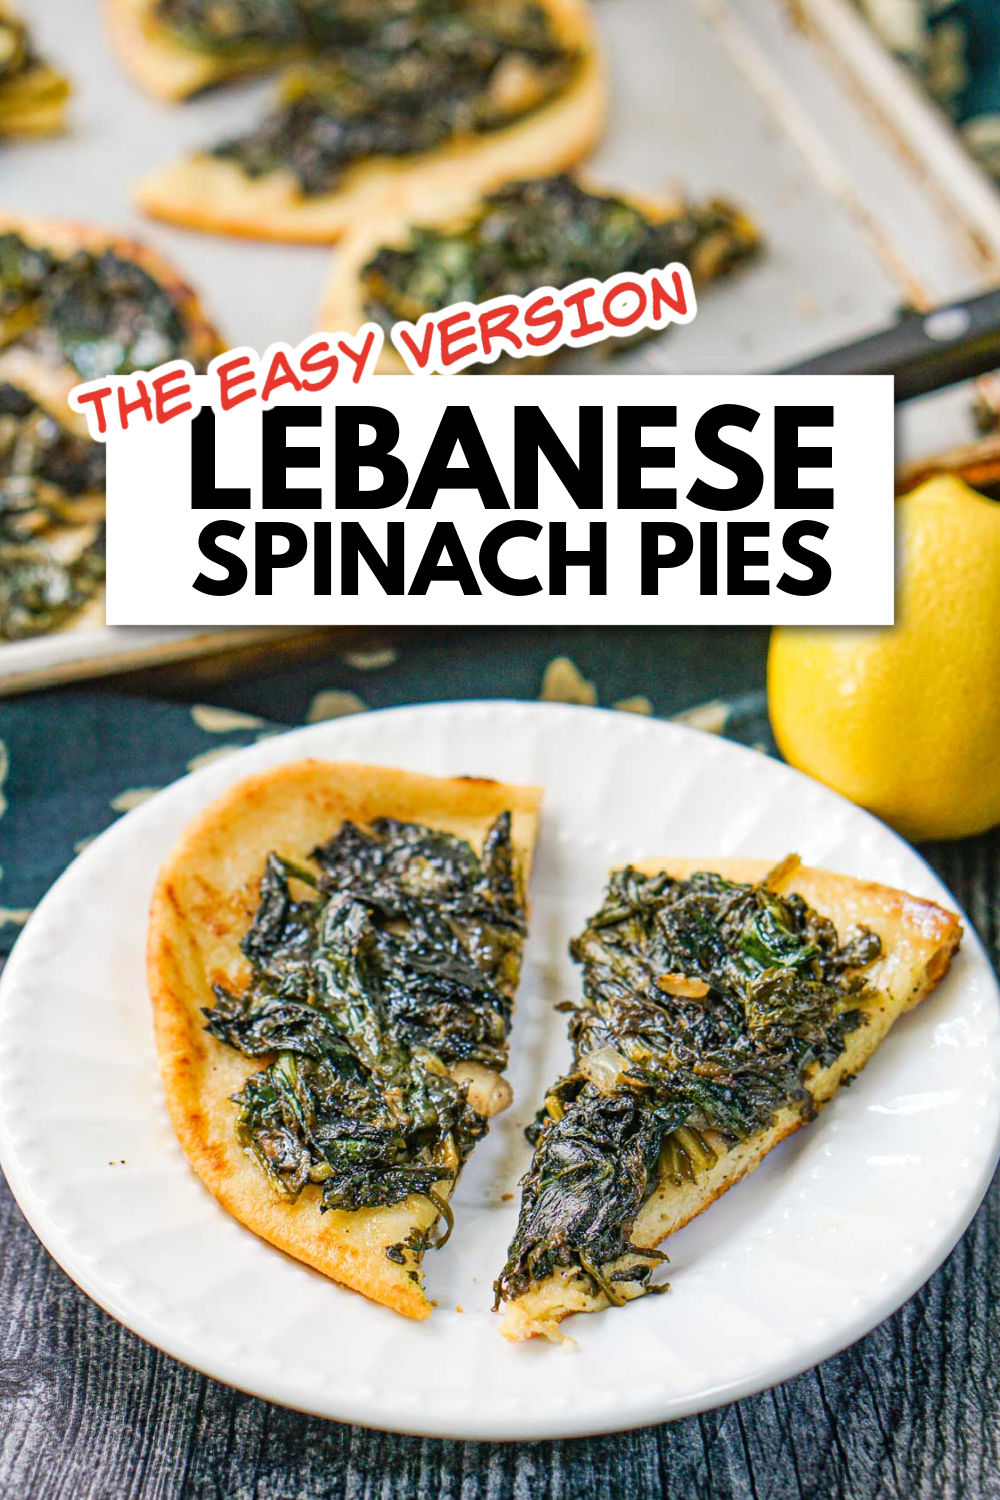 white plate and baking tray with Lebanese spinach pies and text